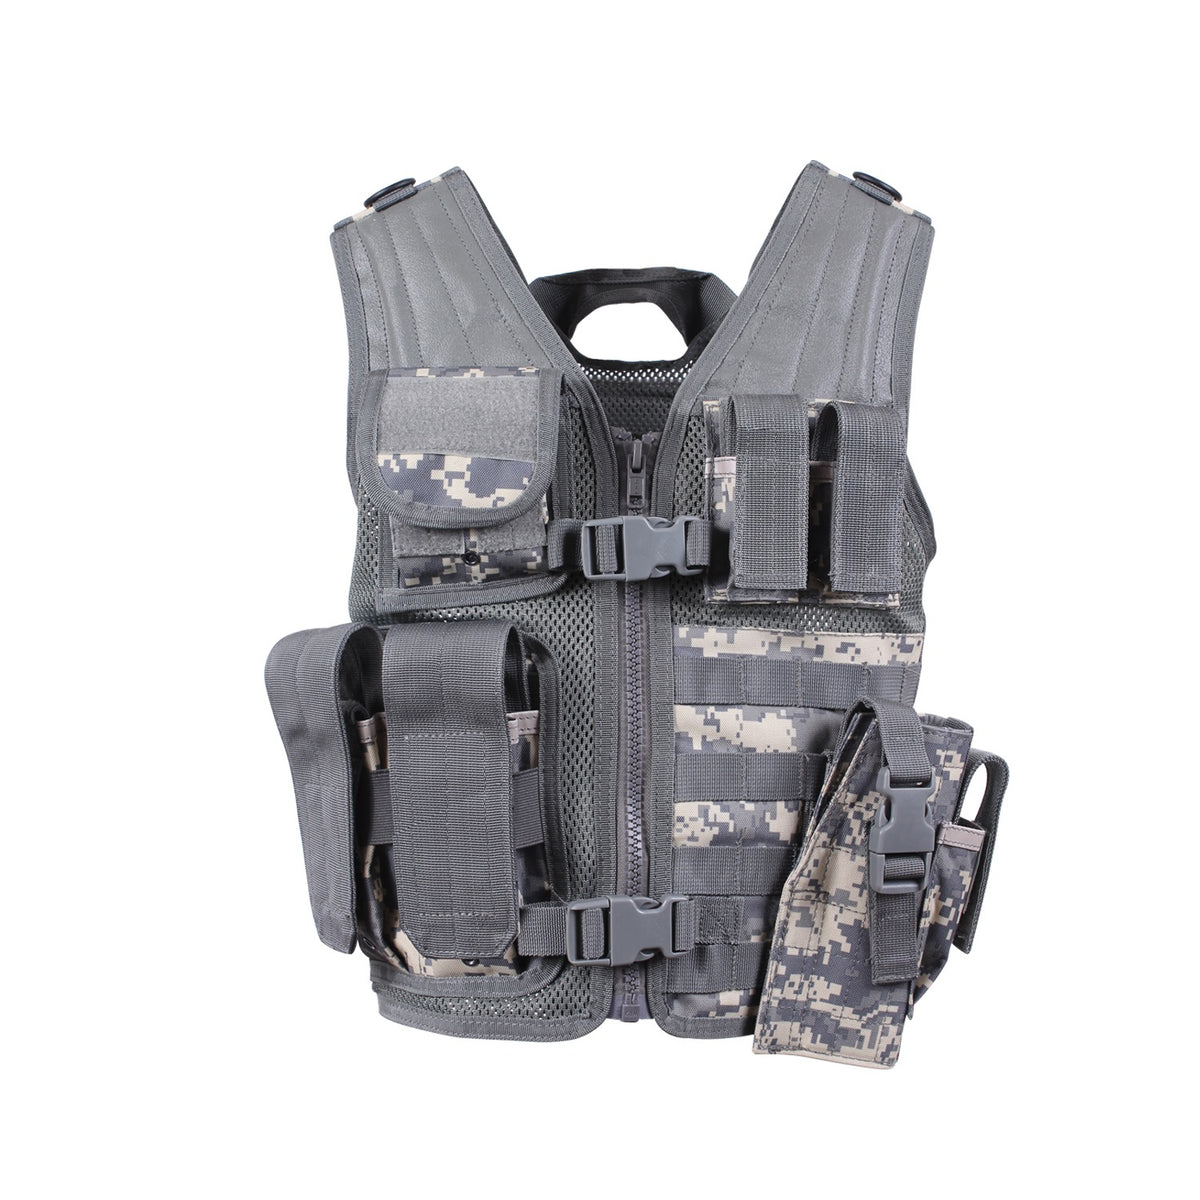 Rothco Kids Tactical Cross Draw Vest